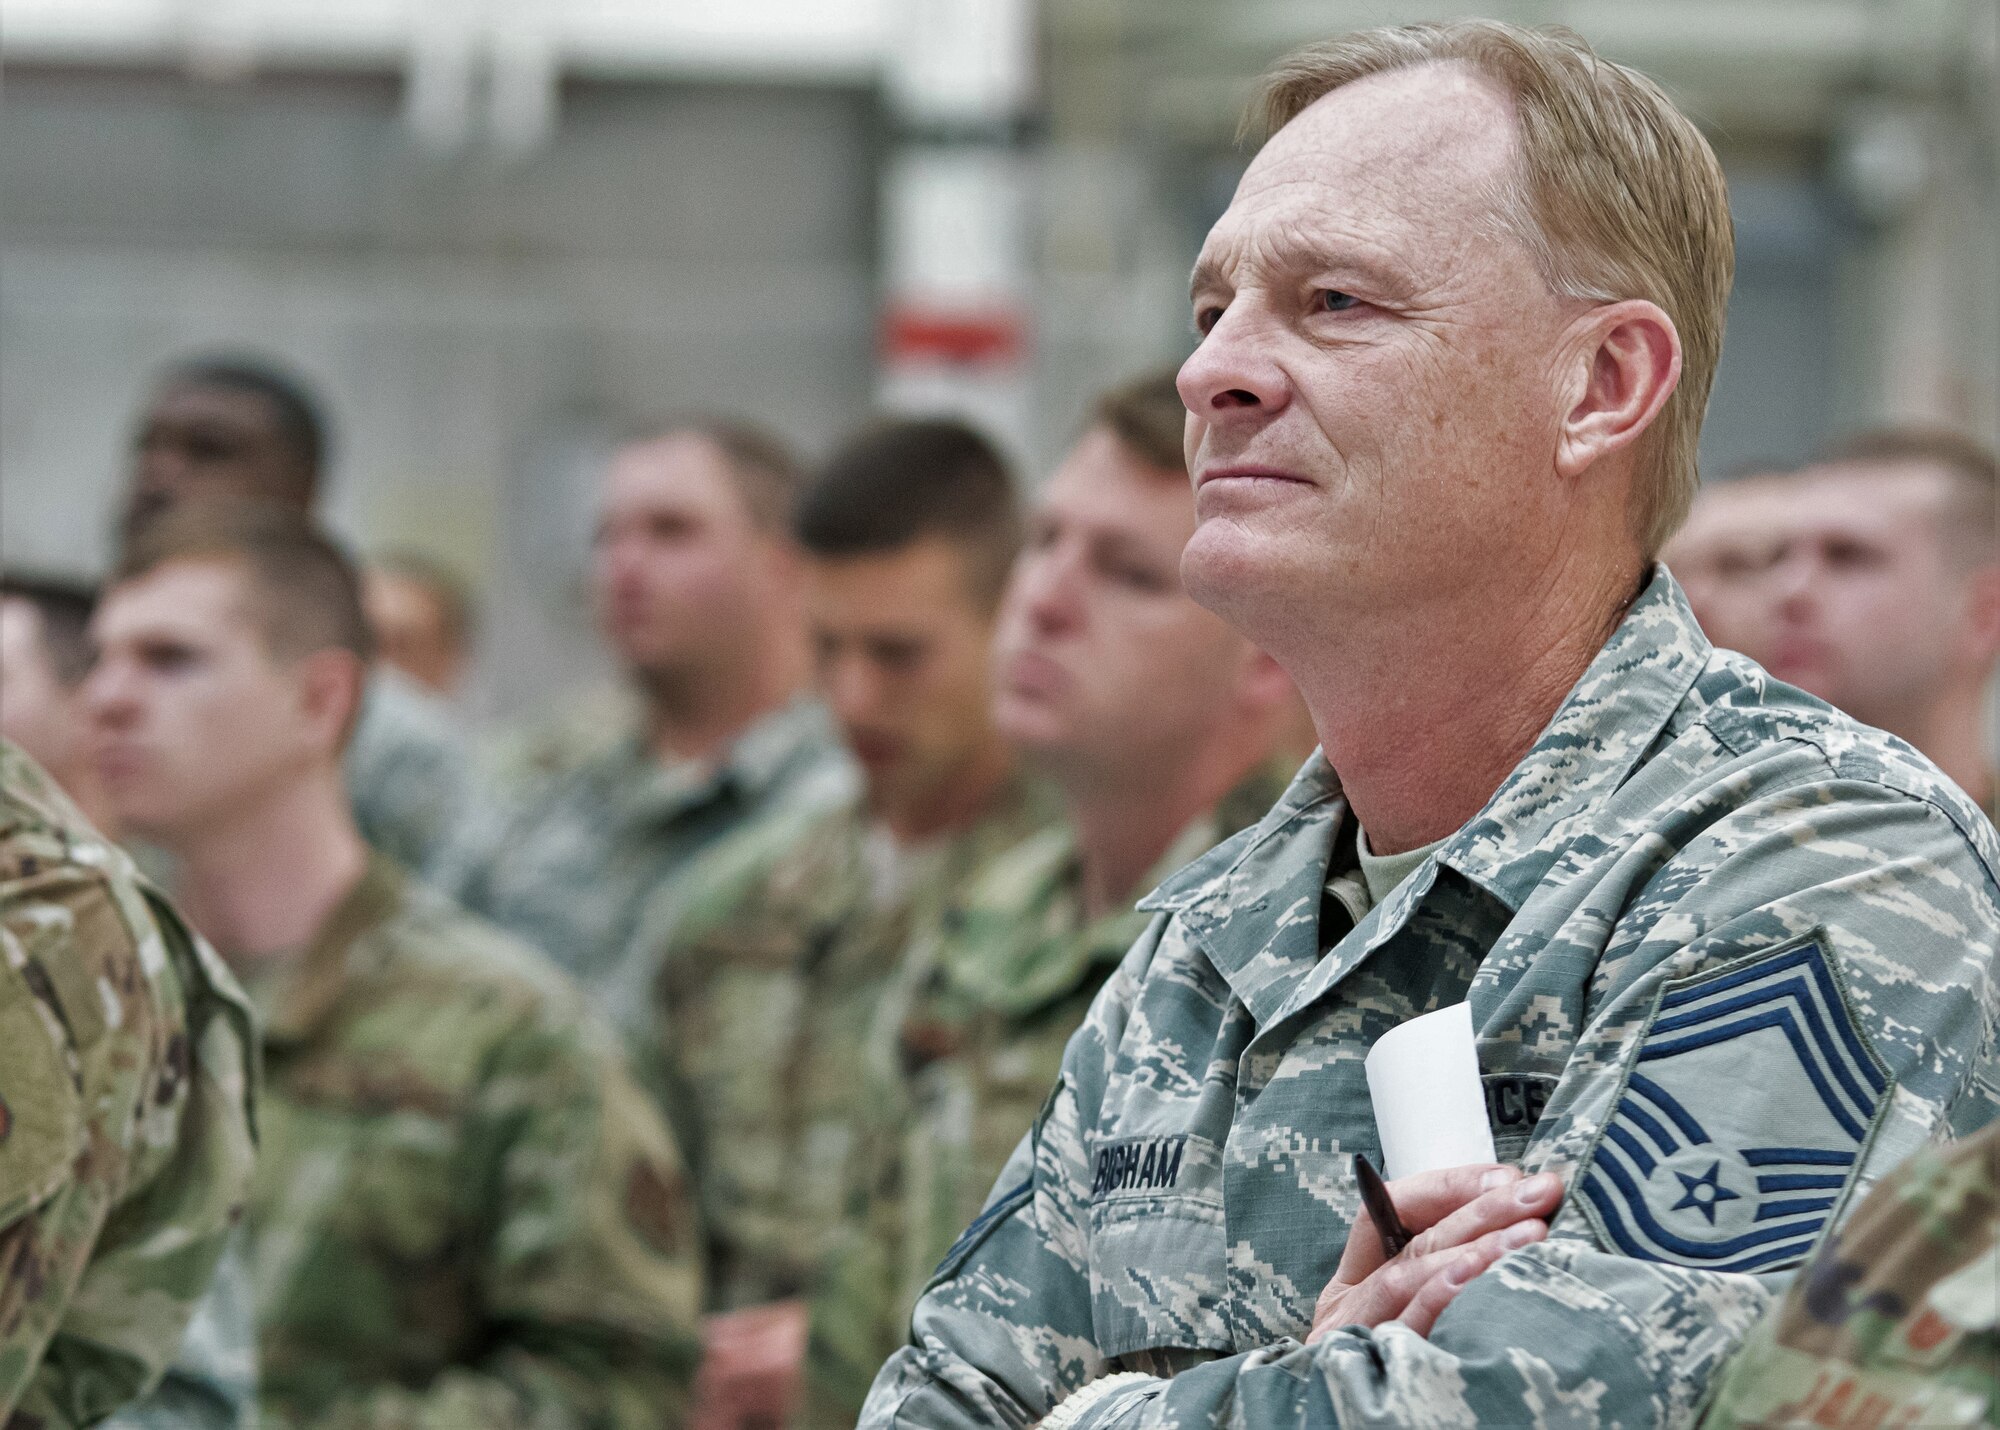 Chief Master Sgt. John Bigham, a Missouri Air National Guard maintenance superintendent with the 139th Airlift Wing, listens to a speaker during a “Resilience Tactical Pause” day at Rosecrans Air National Guard Base, St. Joseph, Missouri. The event was focused on personal resiliency and suicide prevention.